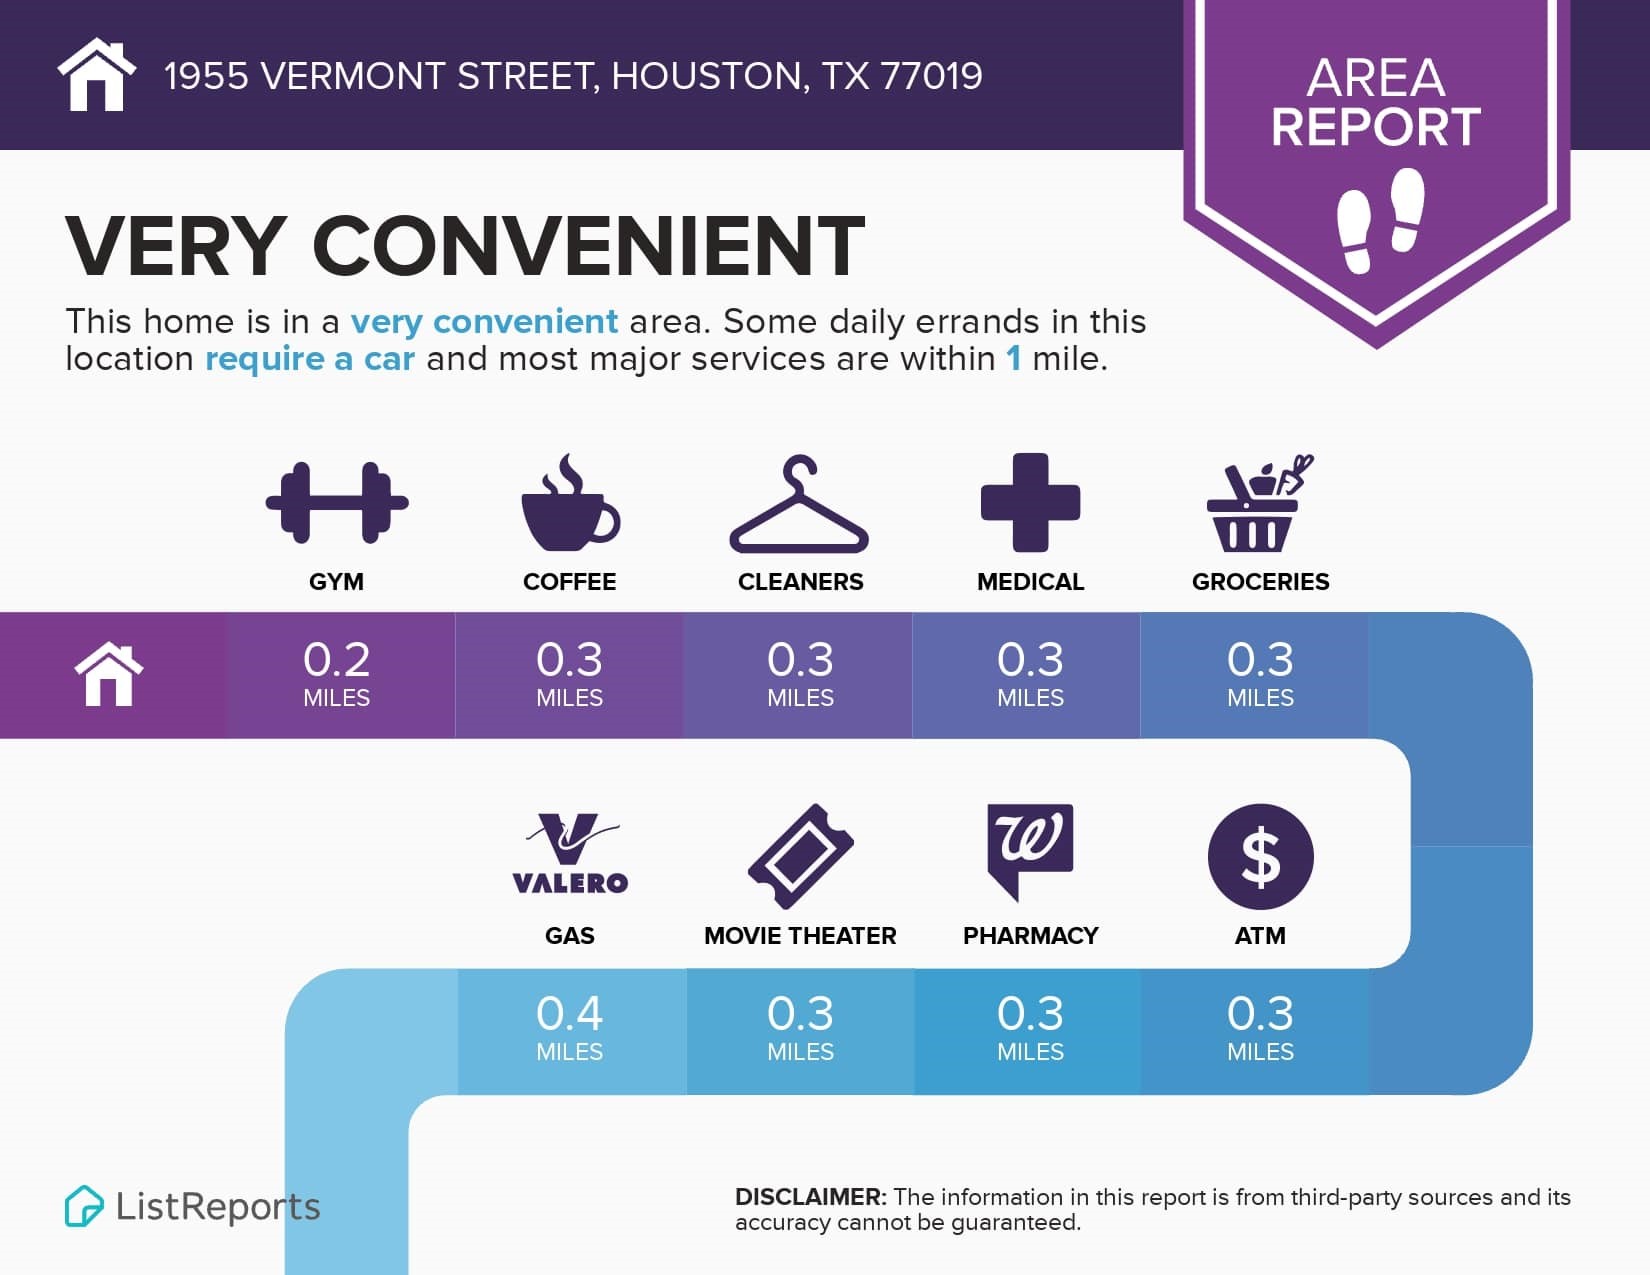 Convenience rating for 1955 Vermont Street!